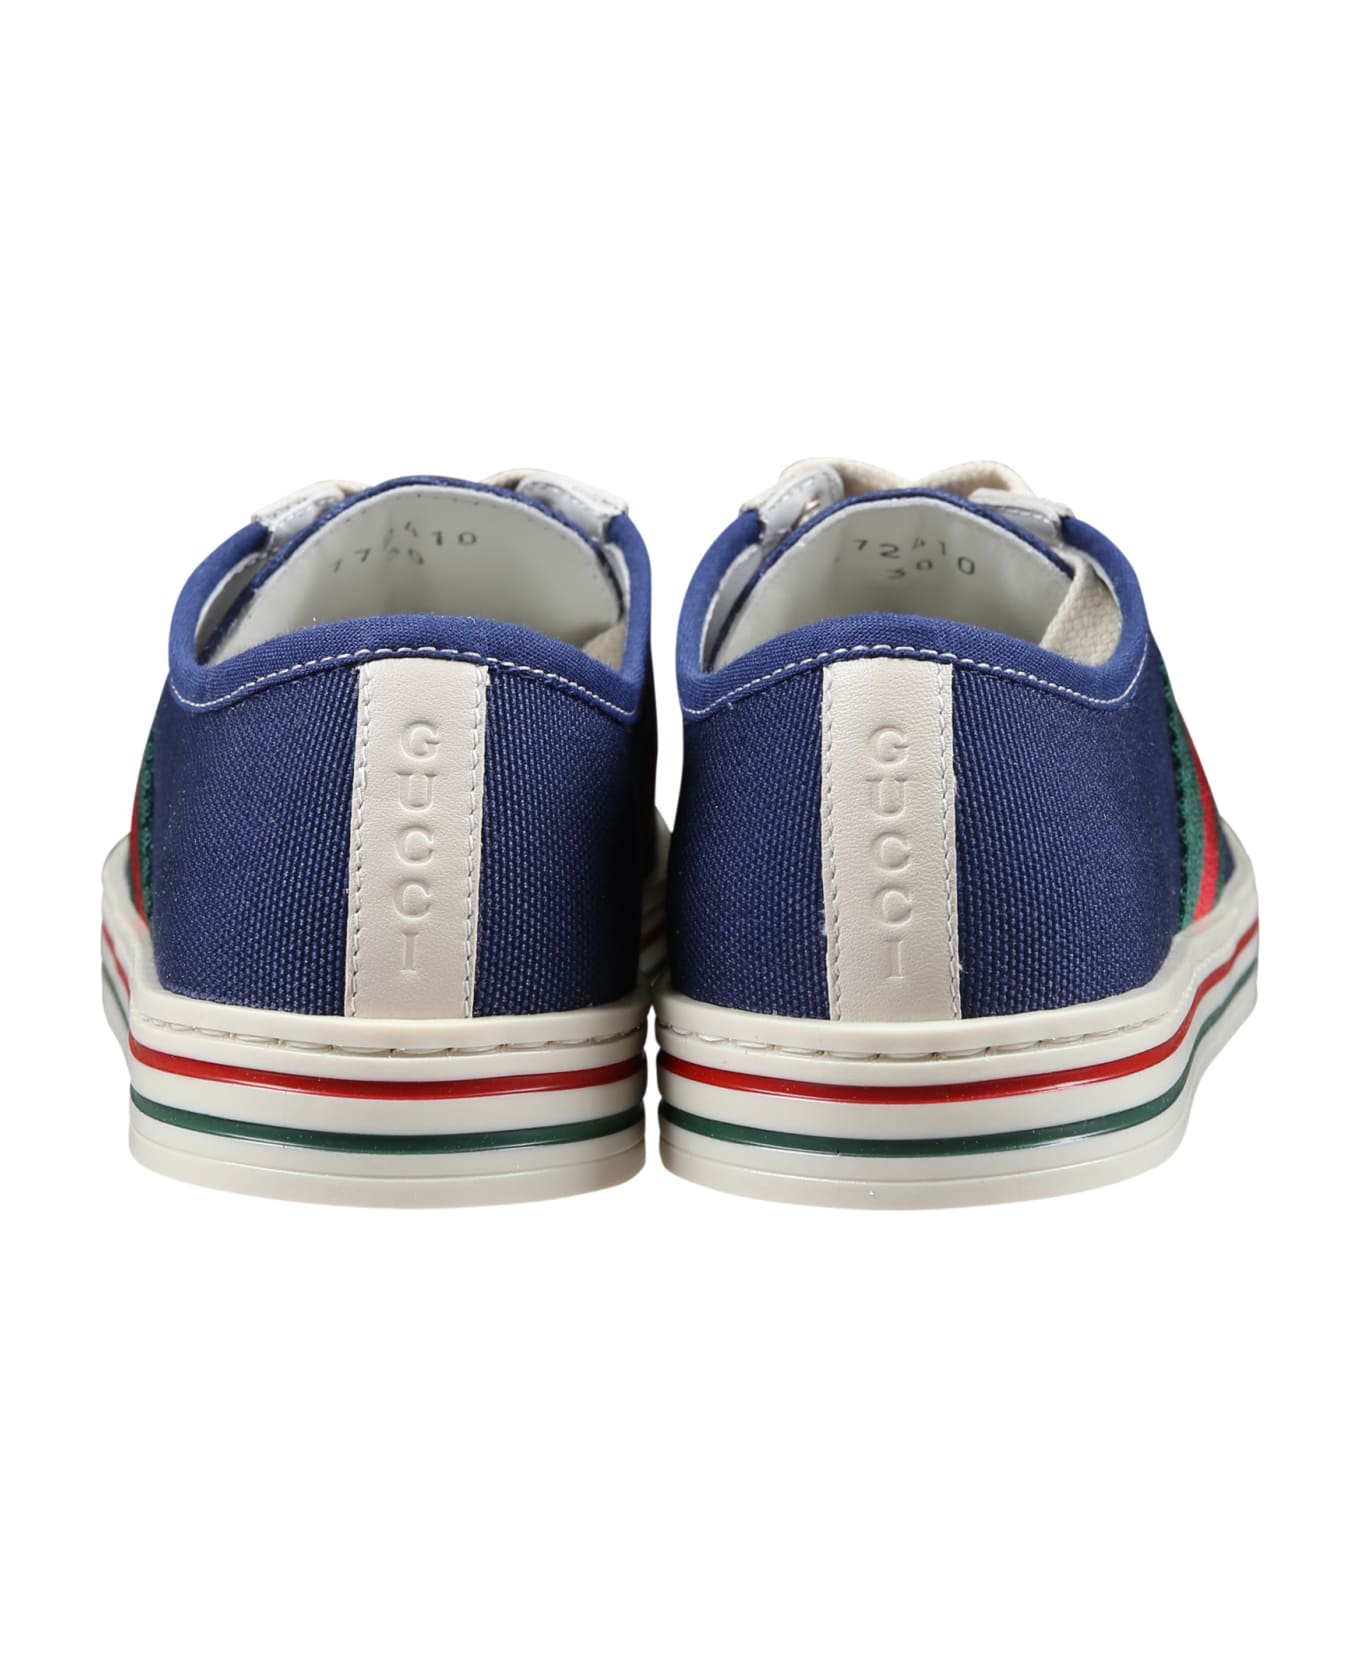 Gucci Blue Canvas Trainer For Kids With Green And Red Web - Blue